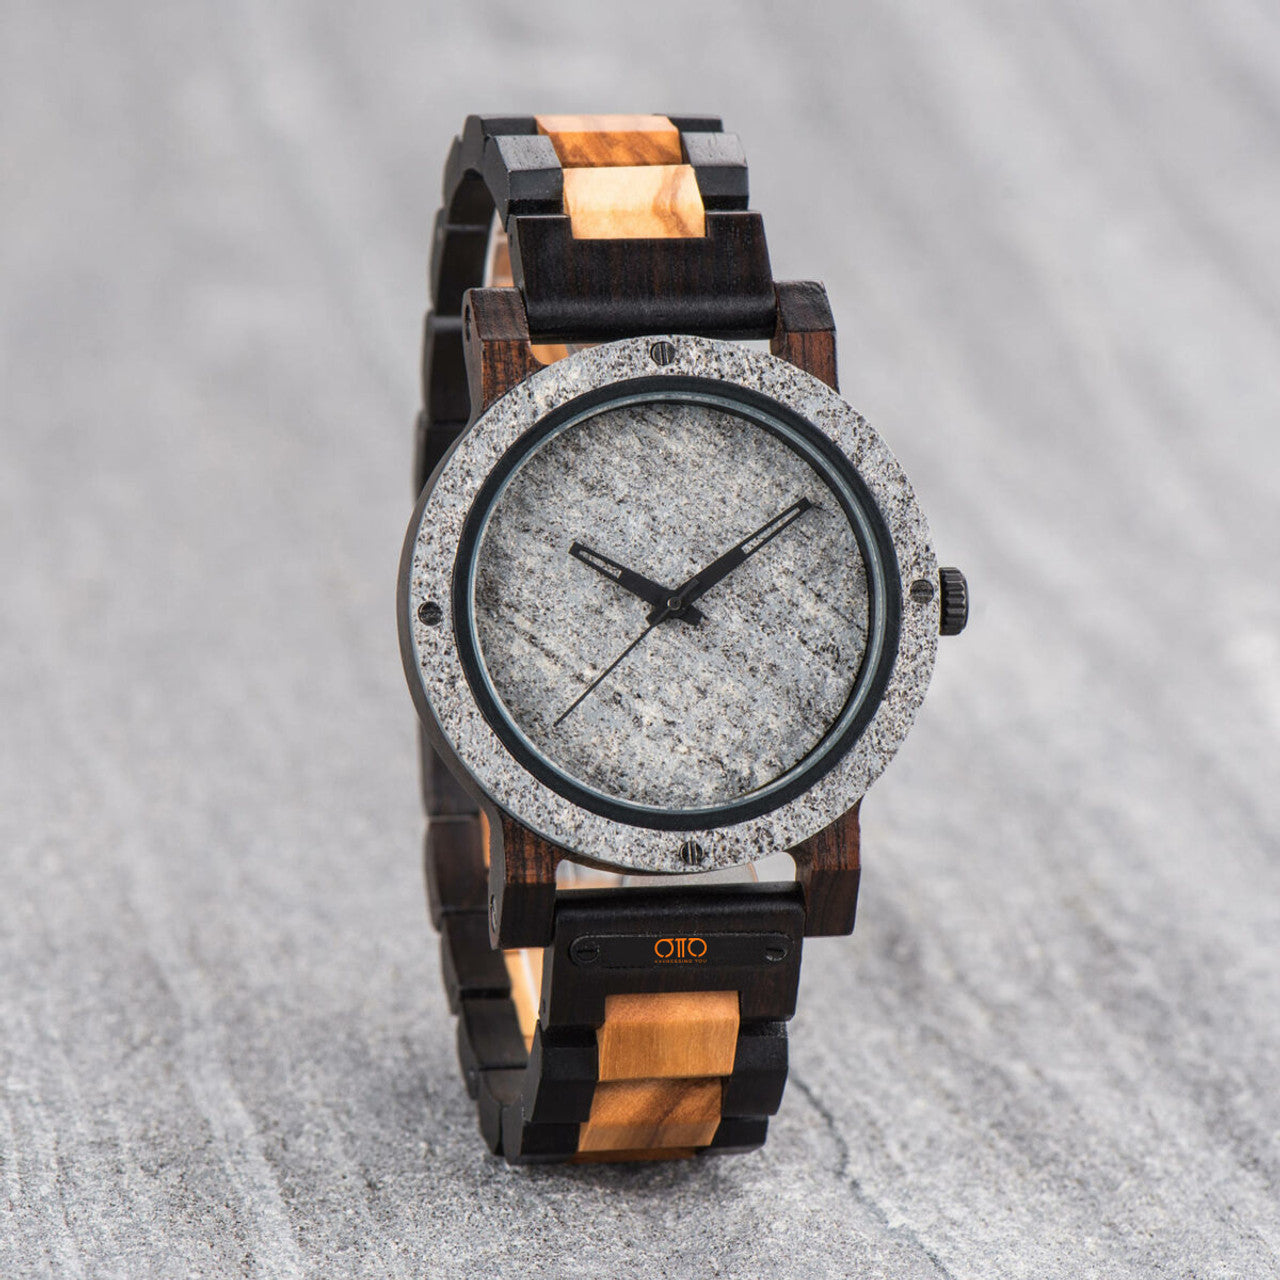 OTTO Wood Watch - Natural Rock Maple Wooden Watch – Neptune